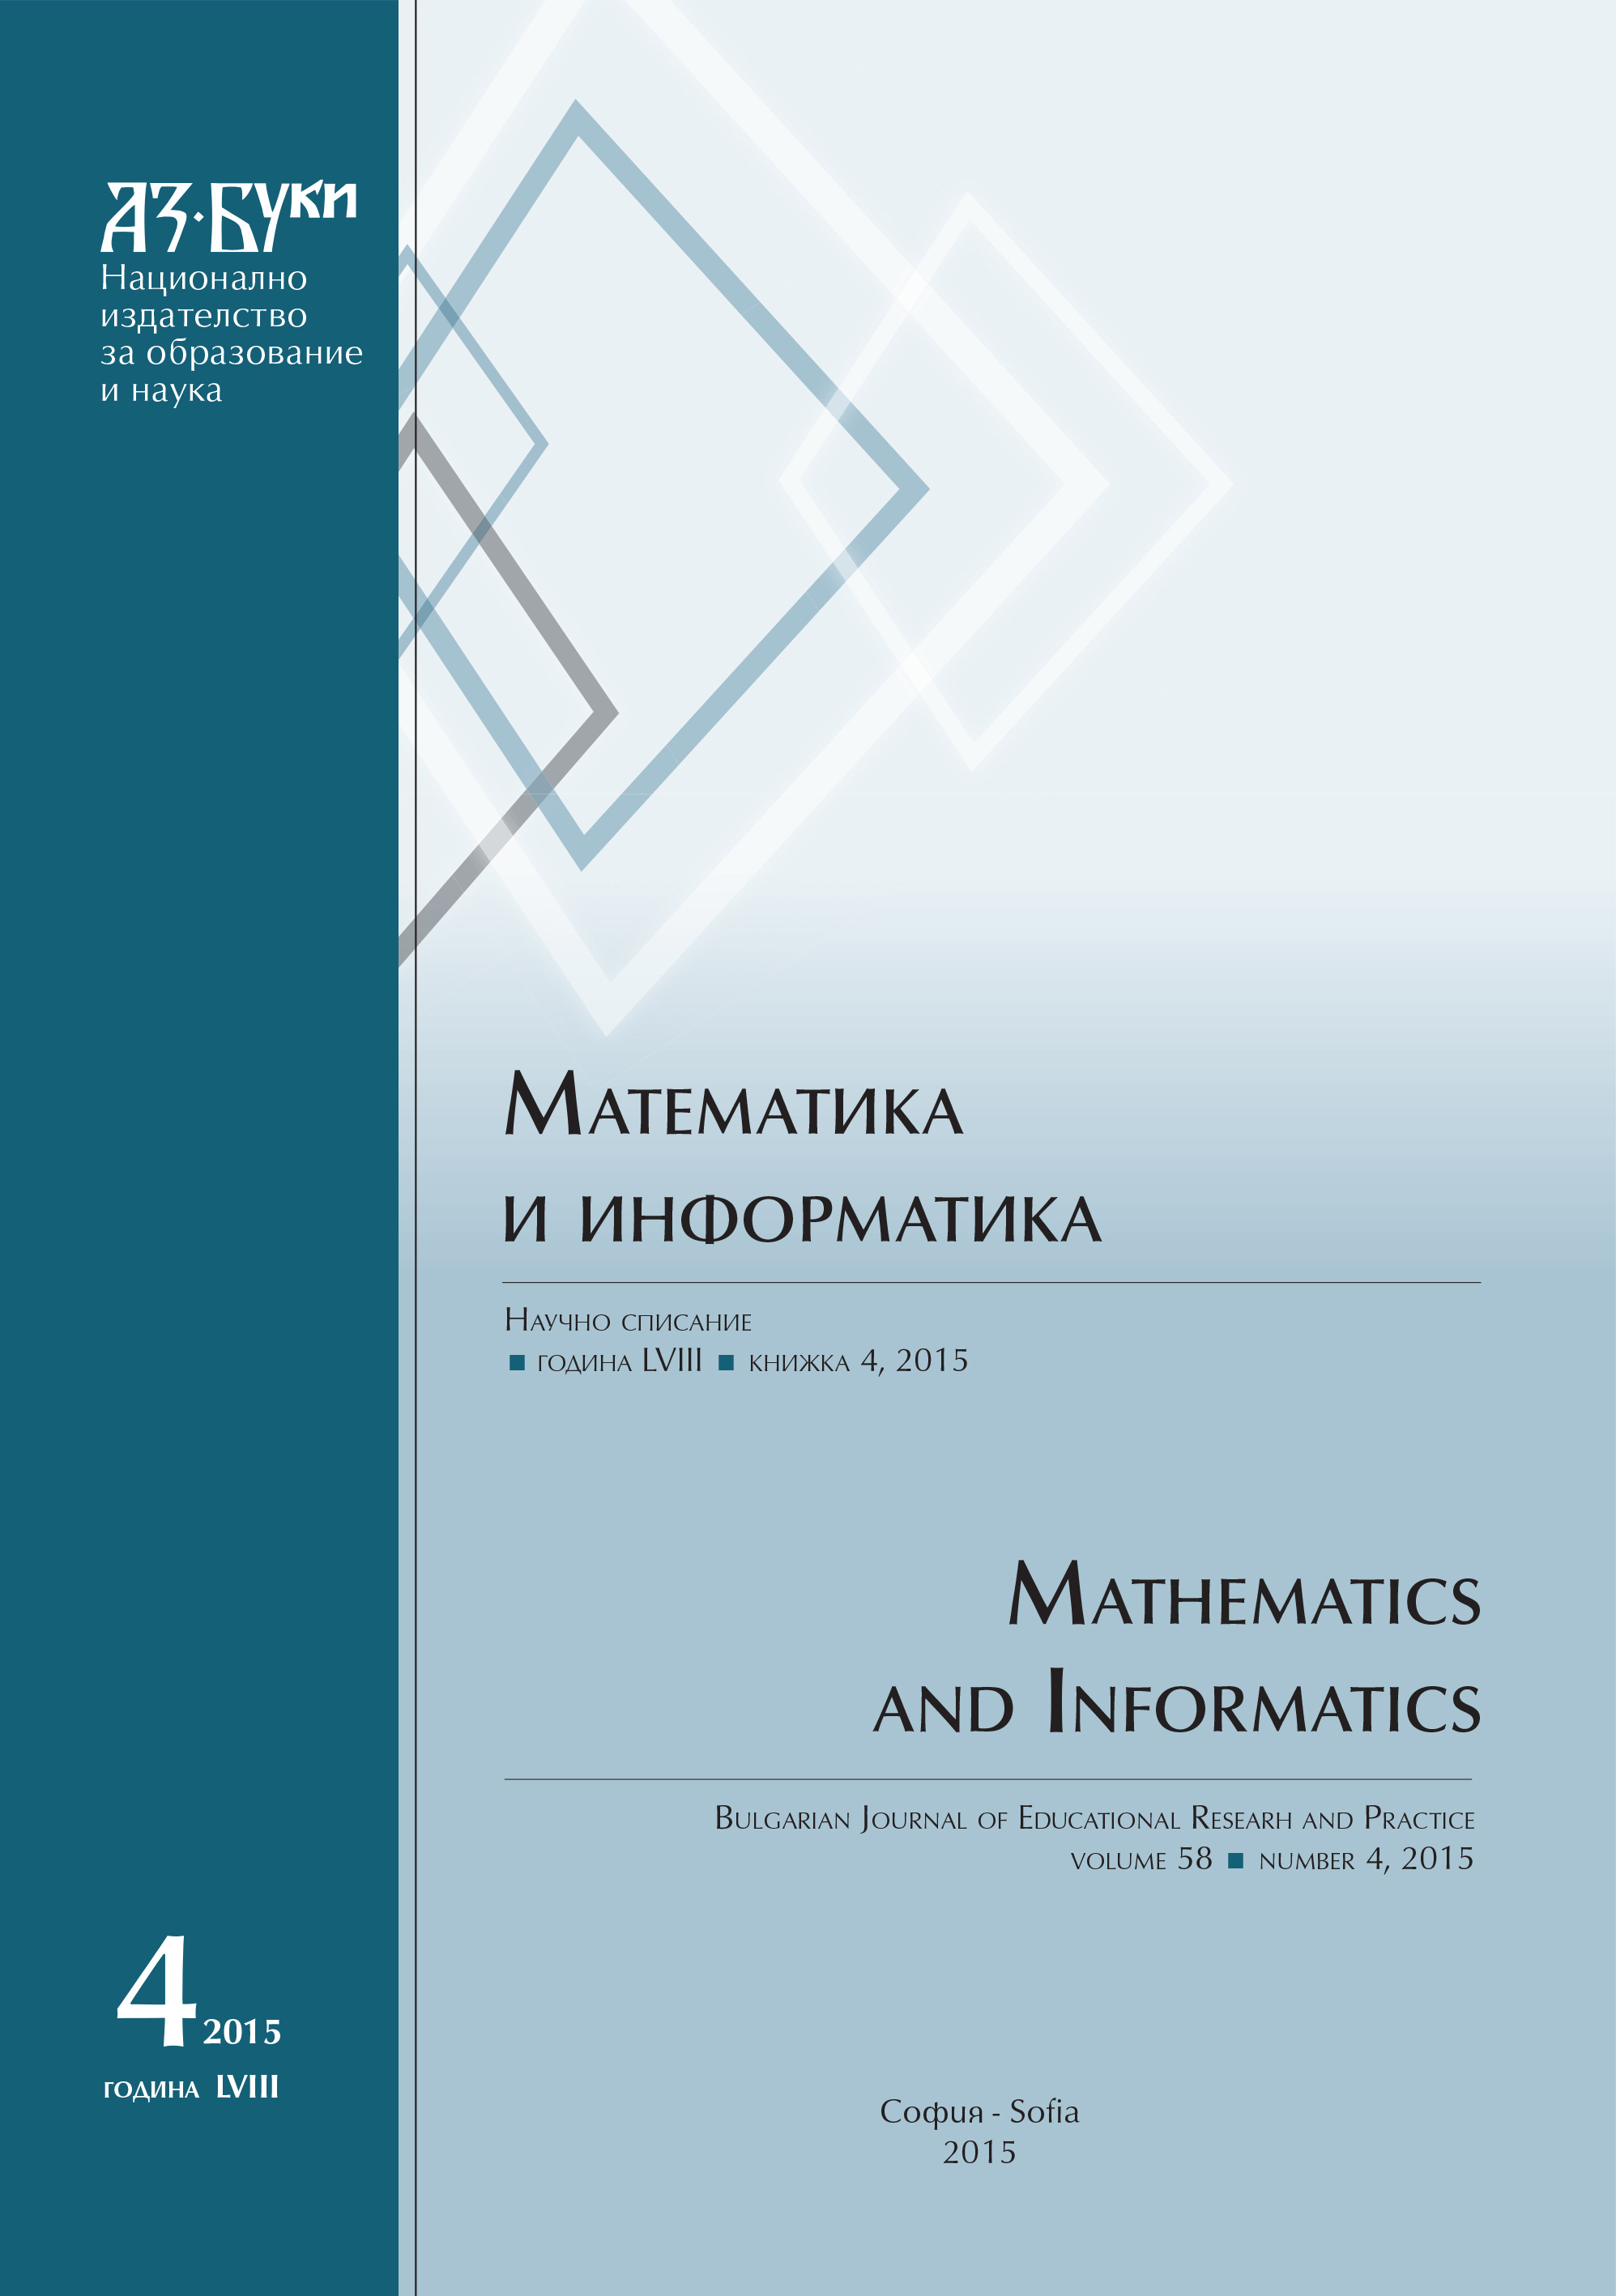 Computer-Discovered Mathematics: Cevian Corner Products Cover Image